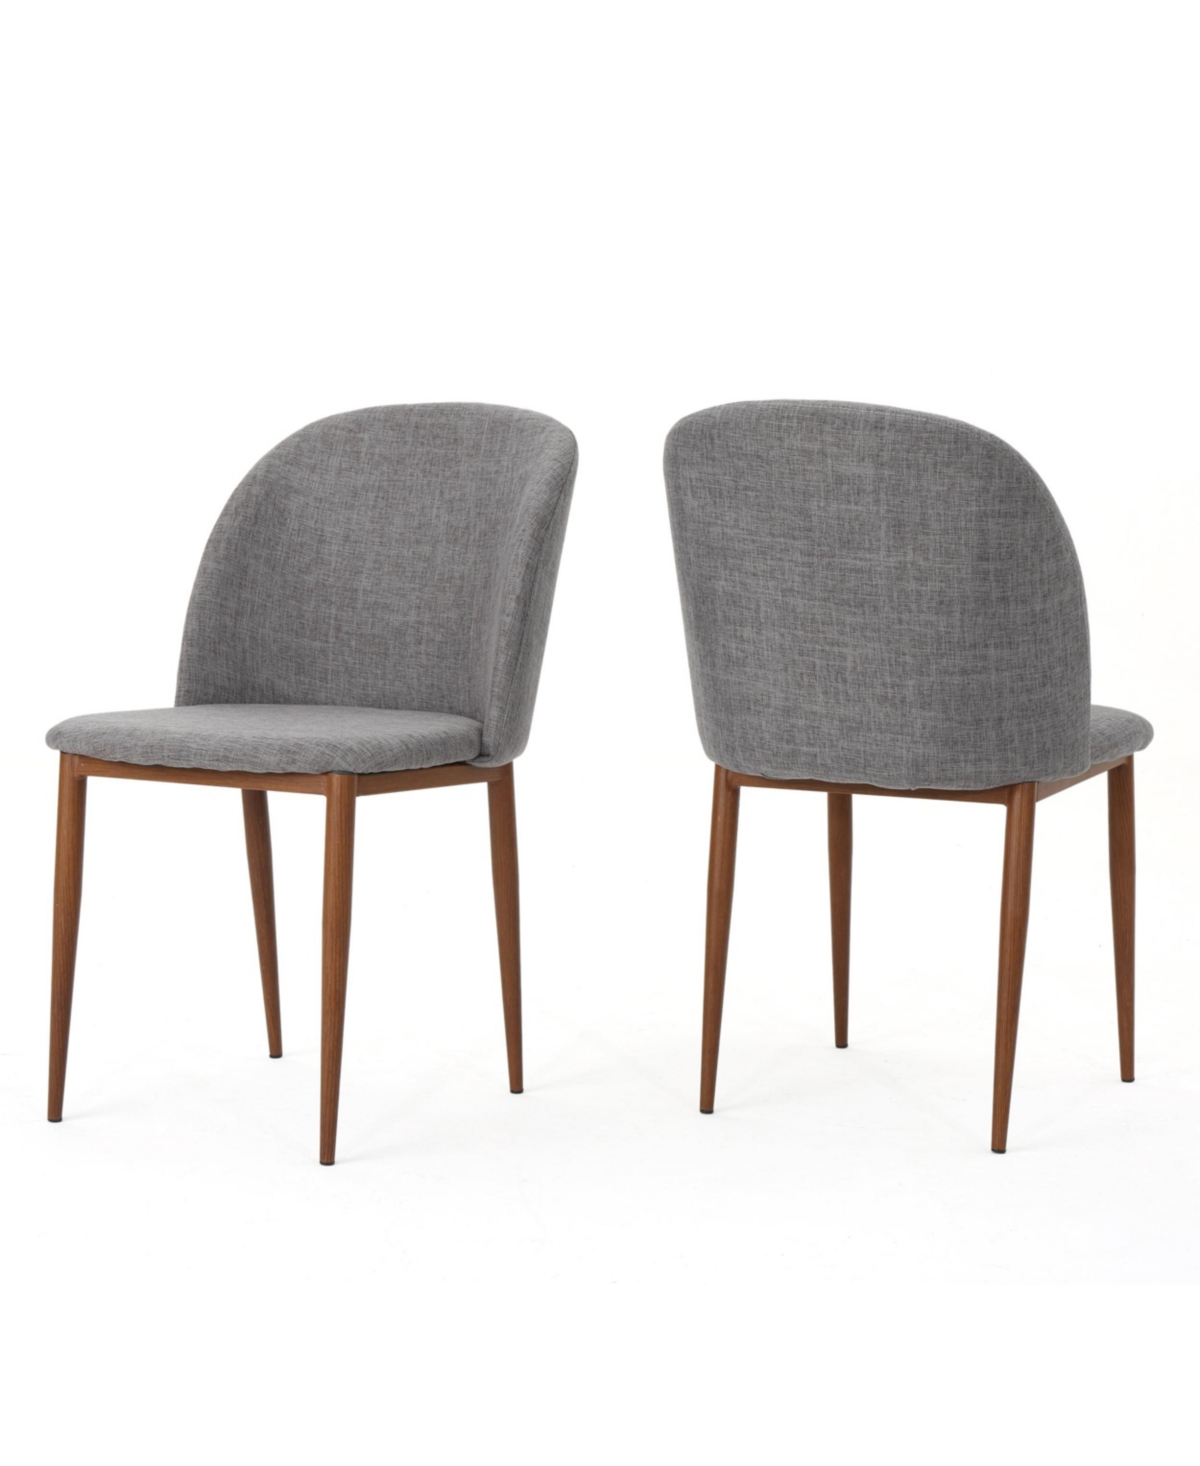 Noble House Anastasia Dining Chairs Set, 2 Piece In Light Gray